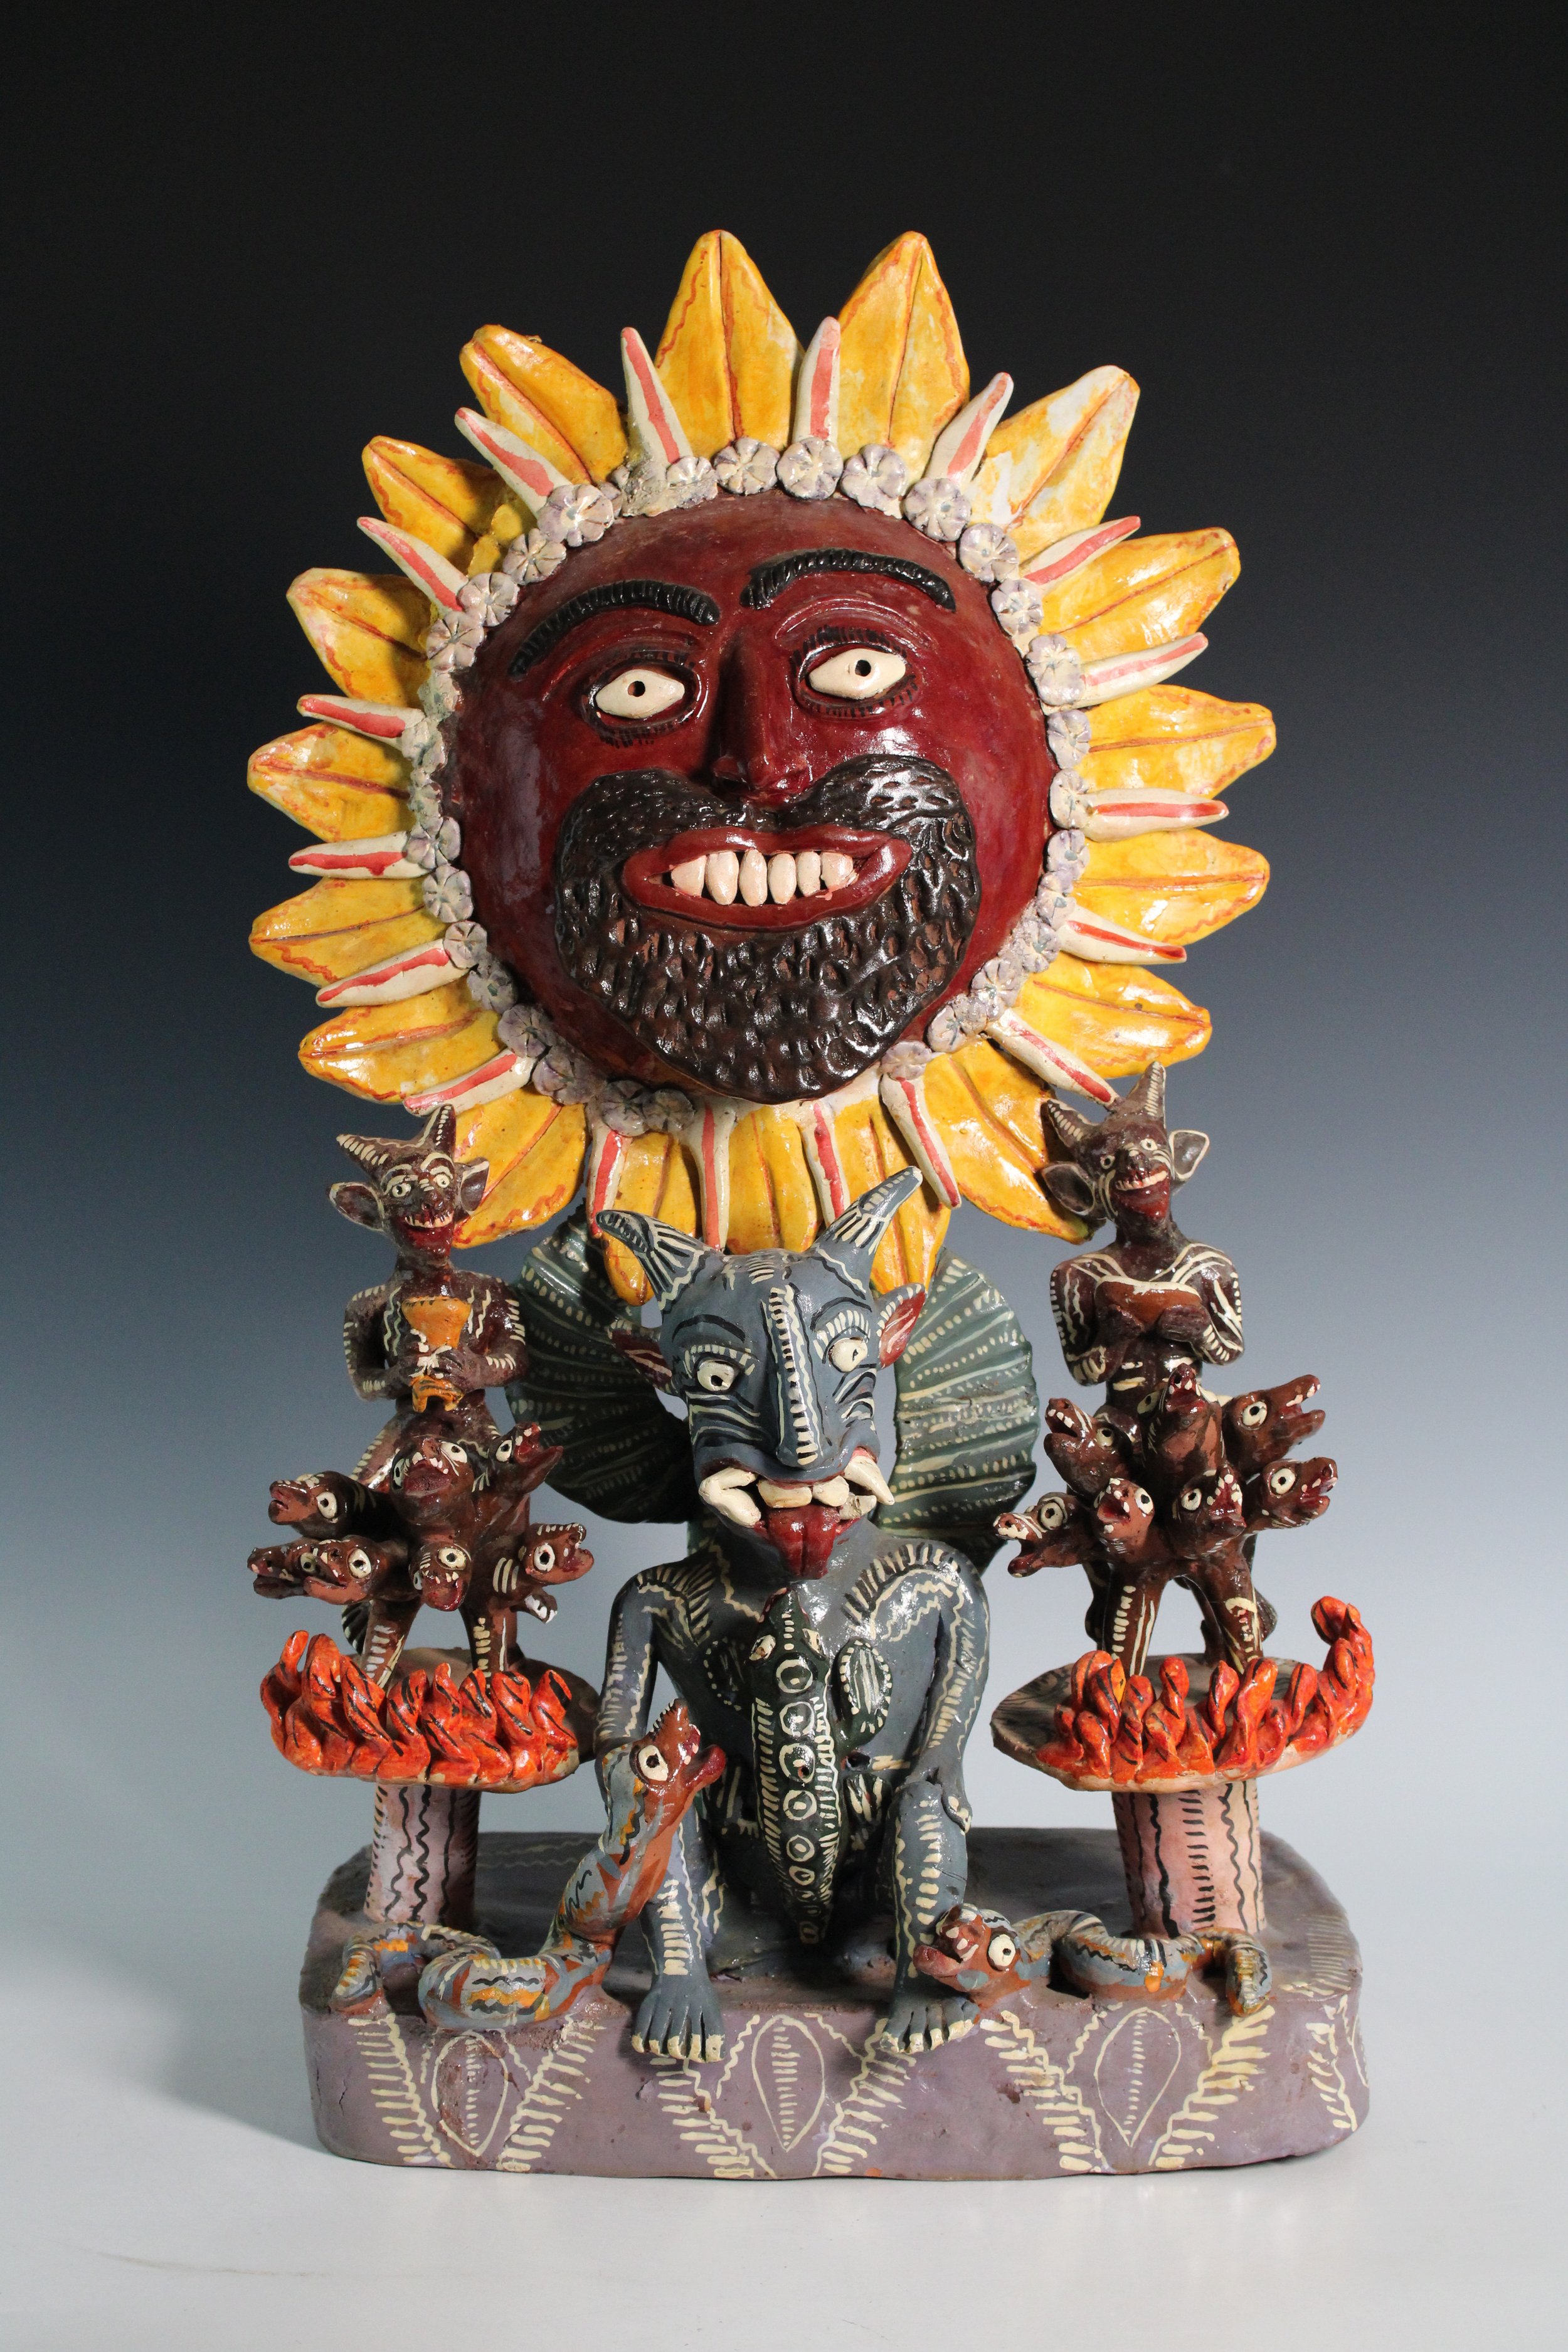 Mexican Folk Art Earthenware Sculpture Featuring the Sun, Demons, Tuzas or Moles and Snakes, 20th Century